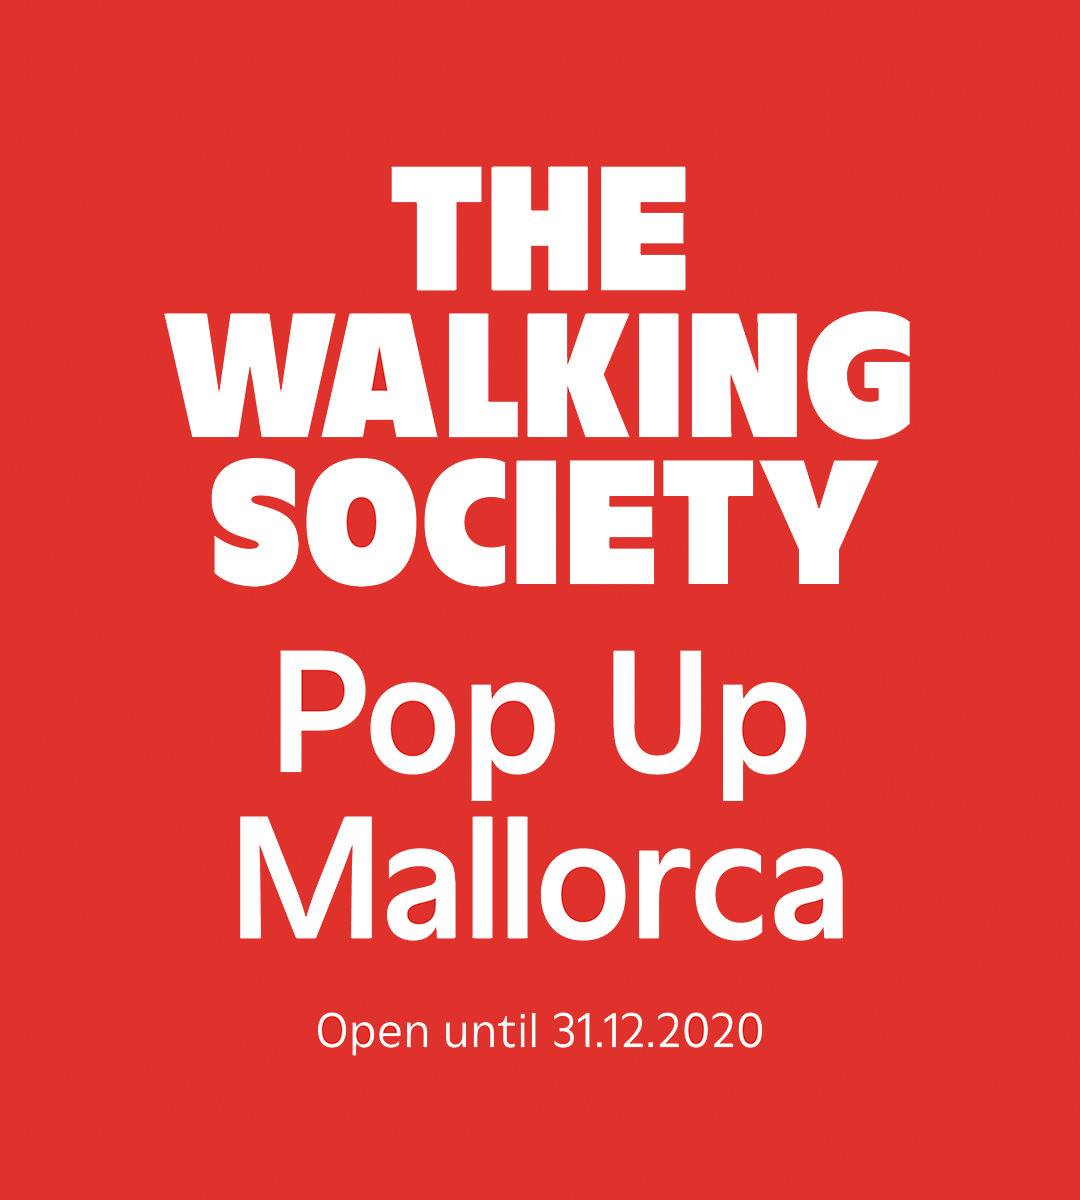 Coinciding with the launch of The Walking Society and reinforcing the importance of local heritage and products made on Camper’s island home of Mallorca, we present you The Walking Society Pop Up - Mallorca by bringing you exclusive objects and ideas that represent the essence of Mallorca.